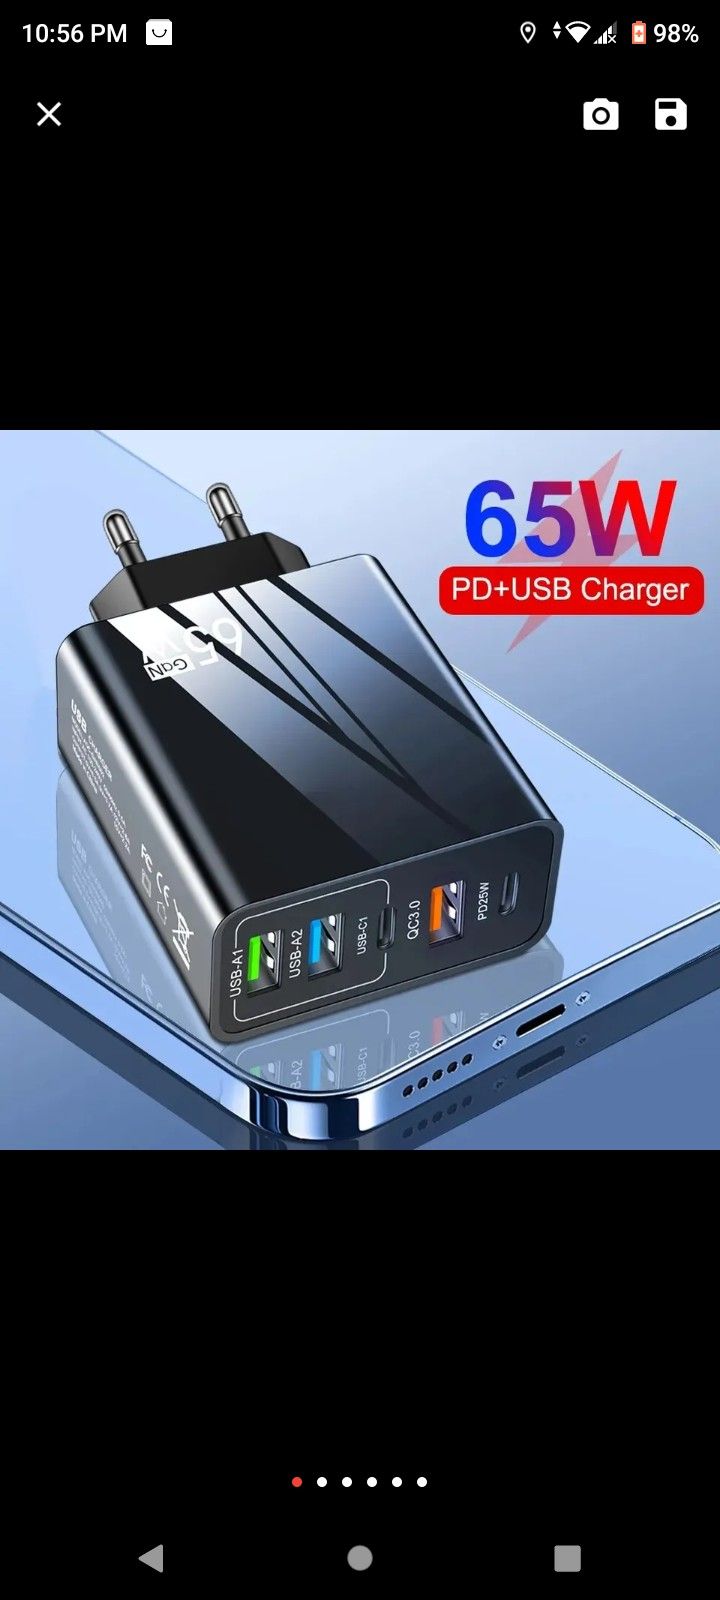 65w Fast Charger Mobile Charging Head Pd Plus 3usb Travel Multi Interface Charger 3.1A For Samsung Xiaomi Iphone Us Adapter